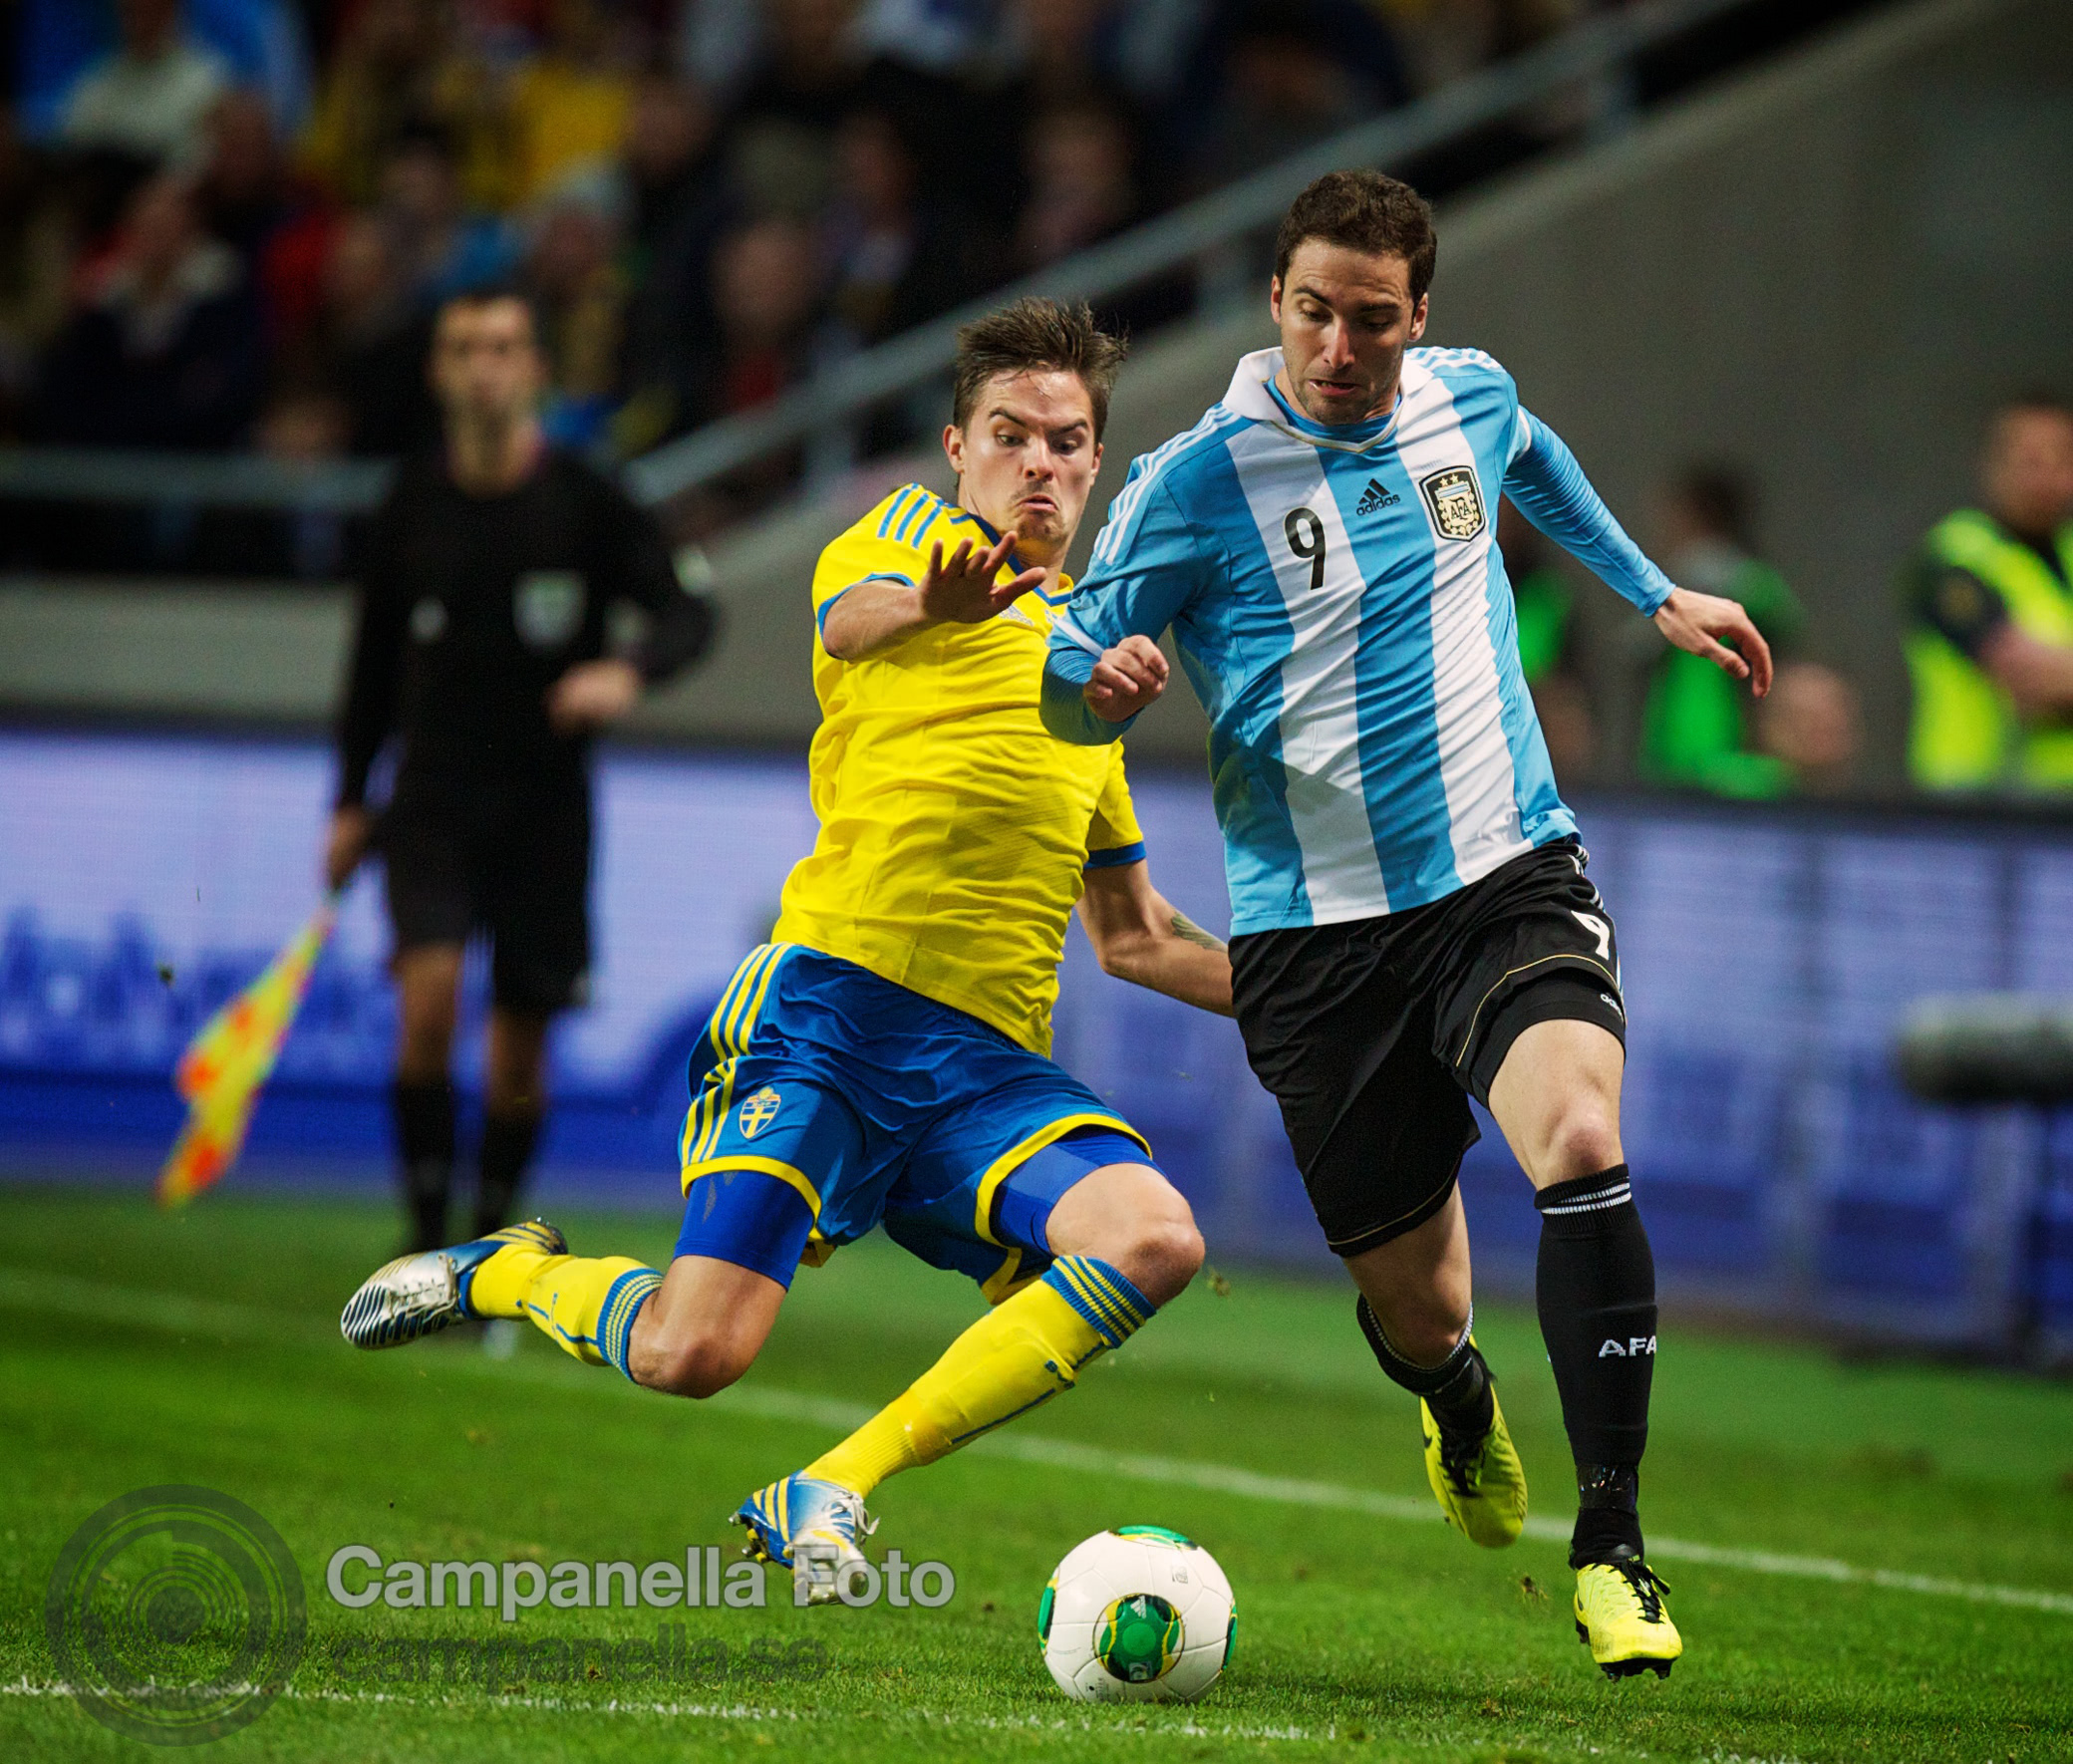 Sweden takes on Argentina - 22 of 35